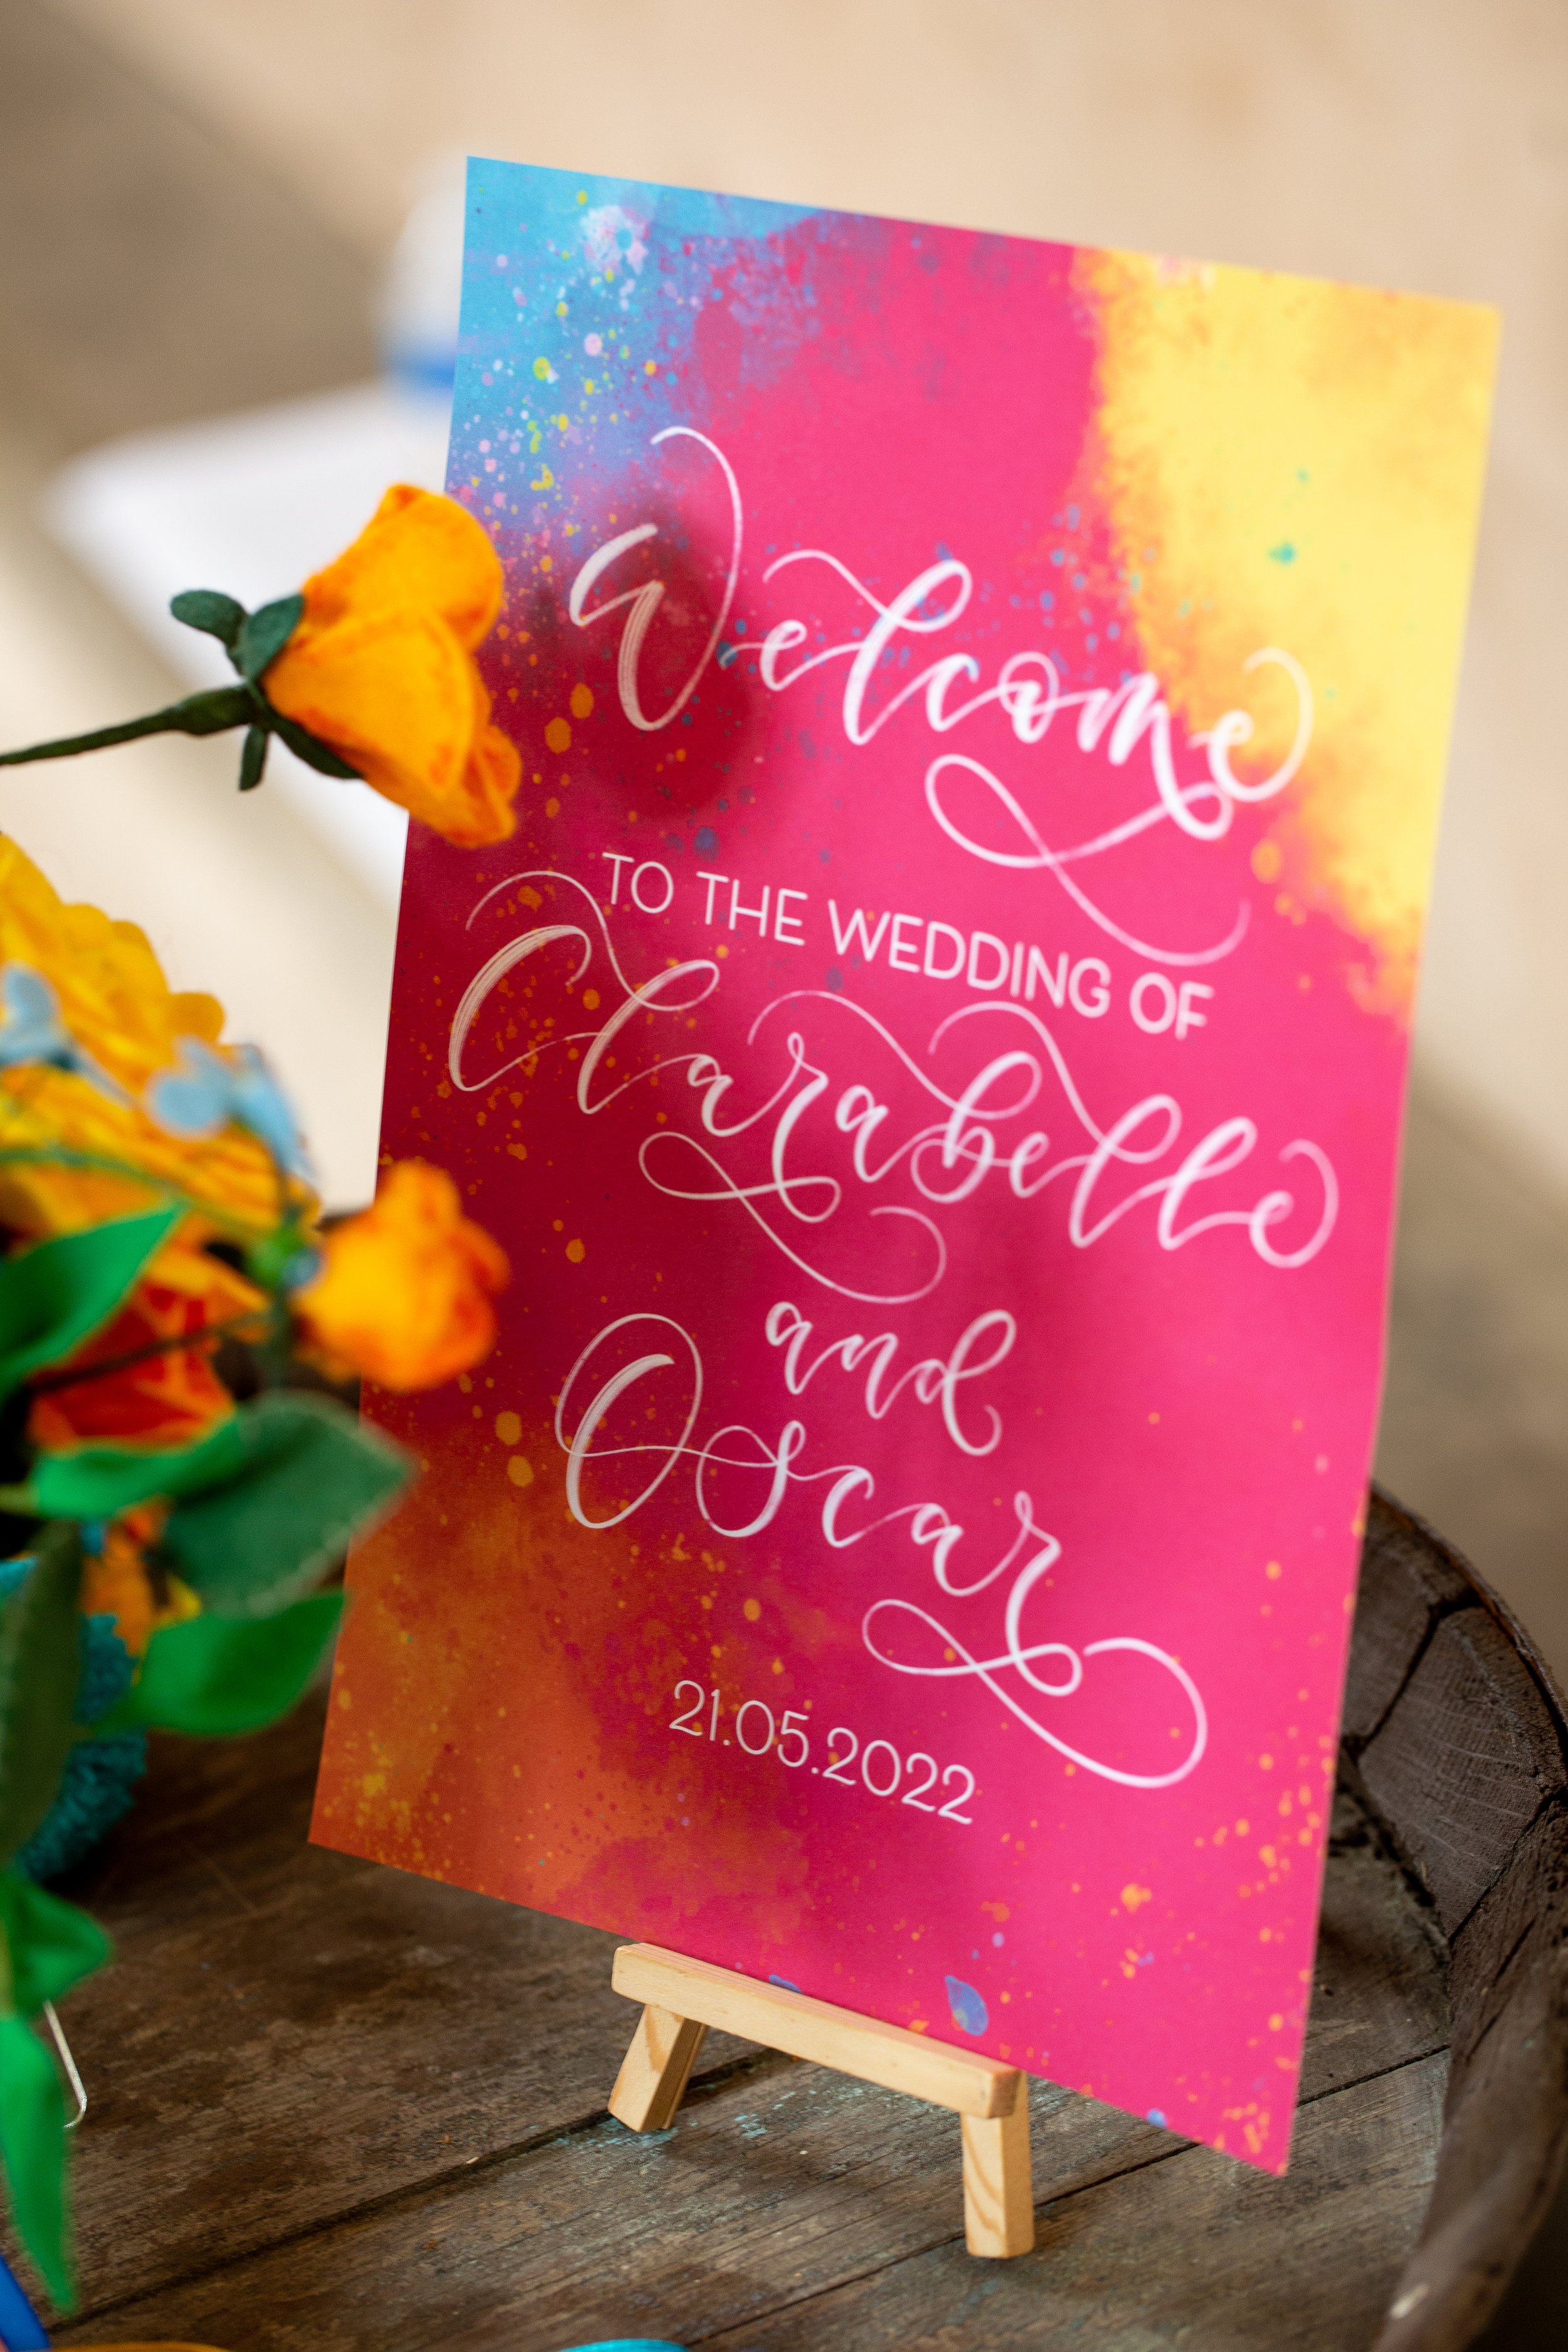 Festival wedding stationery watercolour wedding stationery with hot pink orange and blue, calligraphy welcome sign.jpg